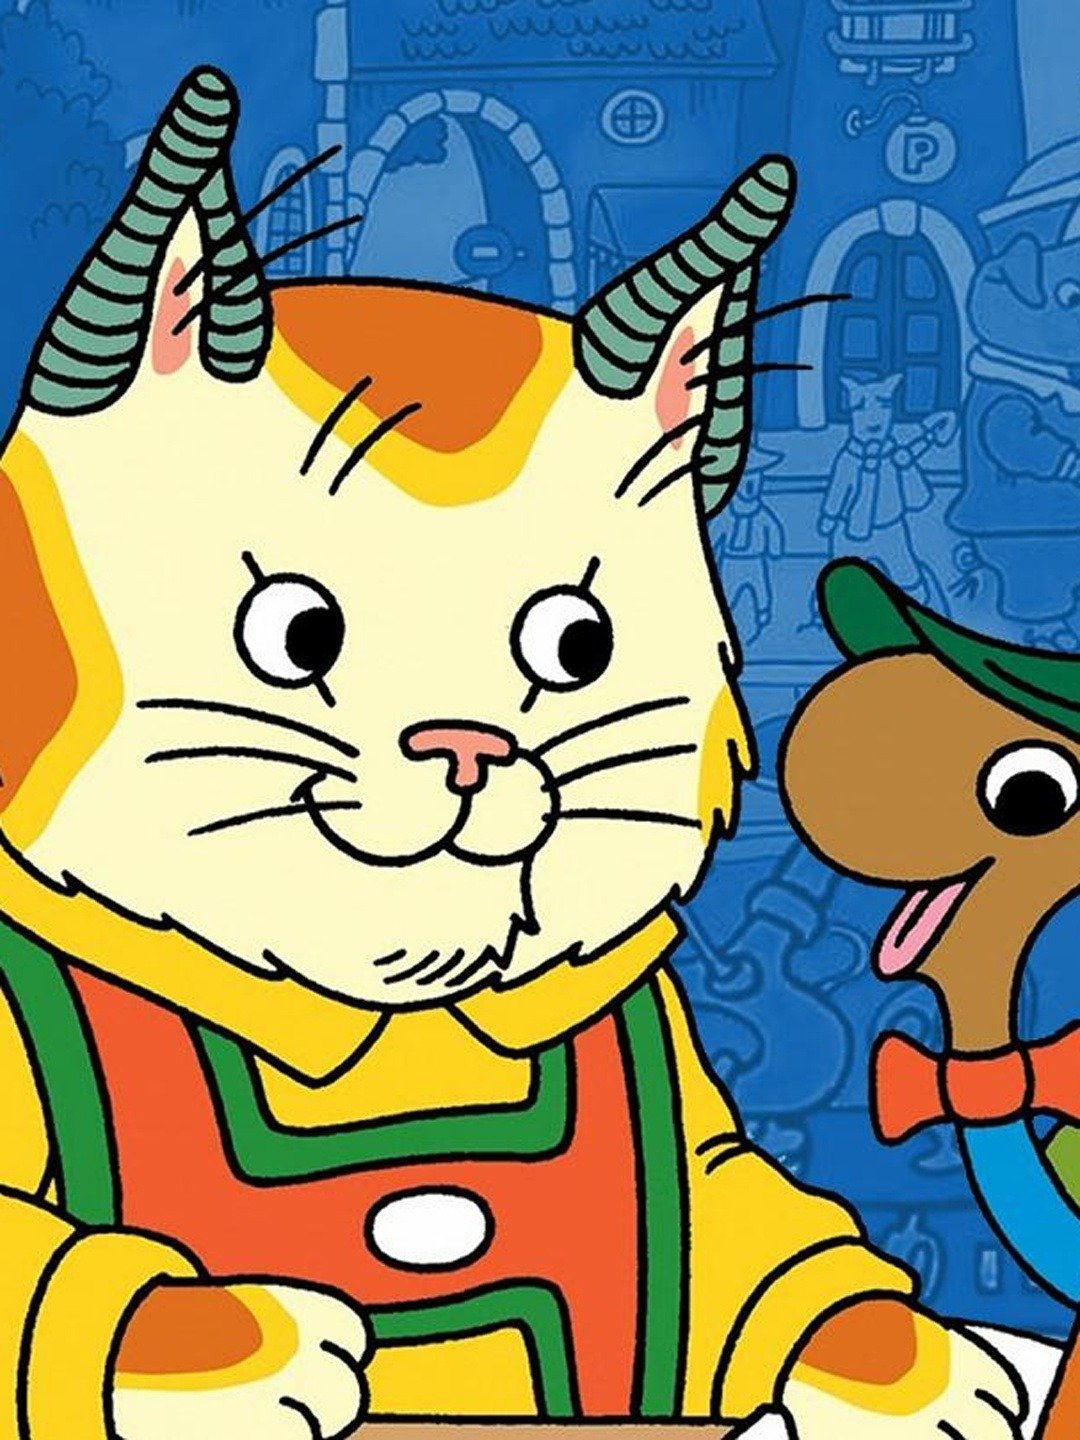 The Busy World of Richard Scarry - Rotten Tomatoes